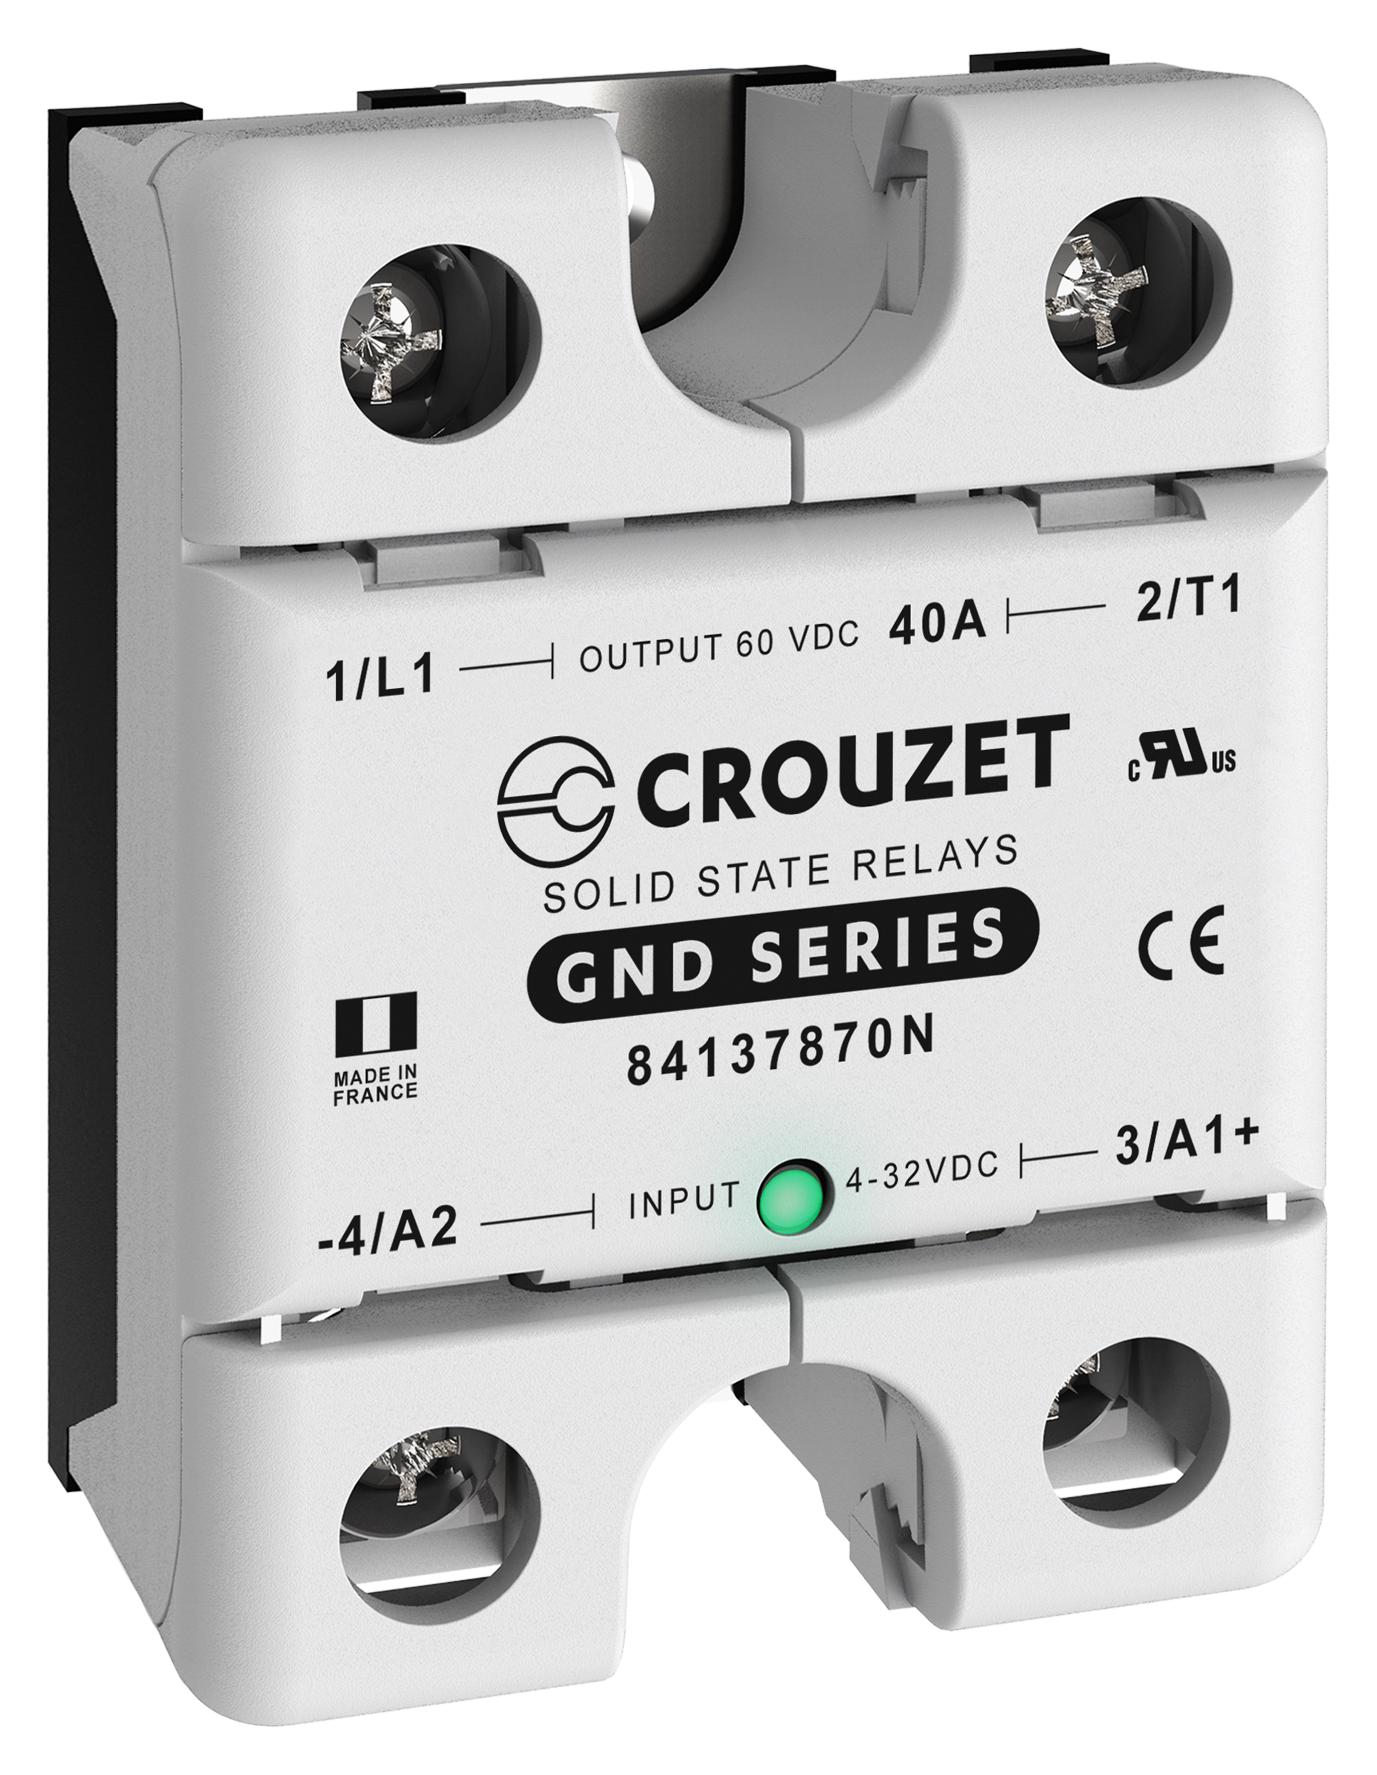 84137870N SOLID STATE RELAY/40A, 5-60VDC, PANEL CROUZET